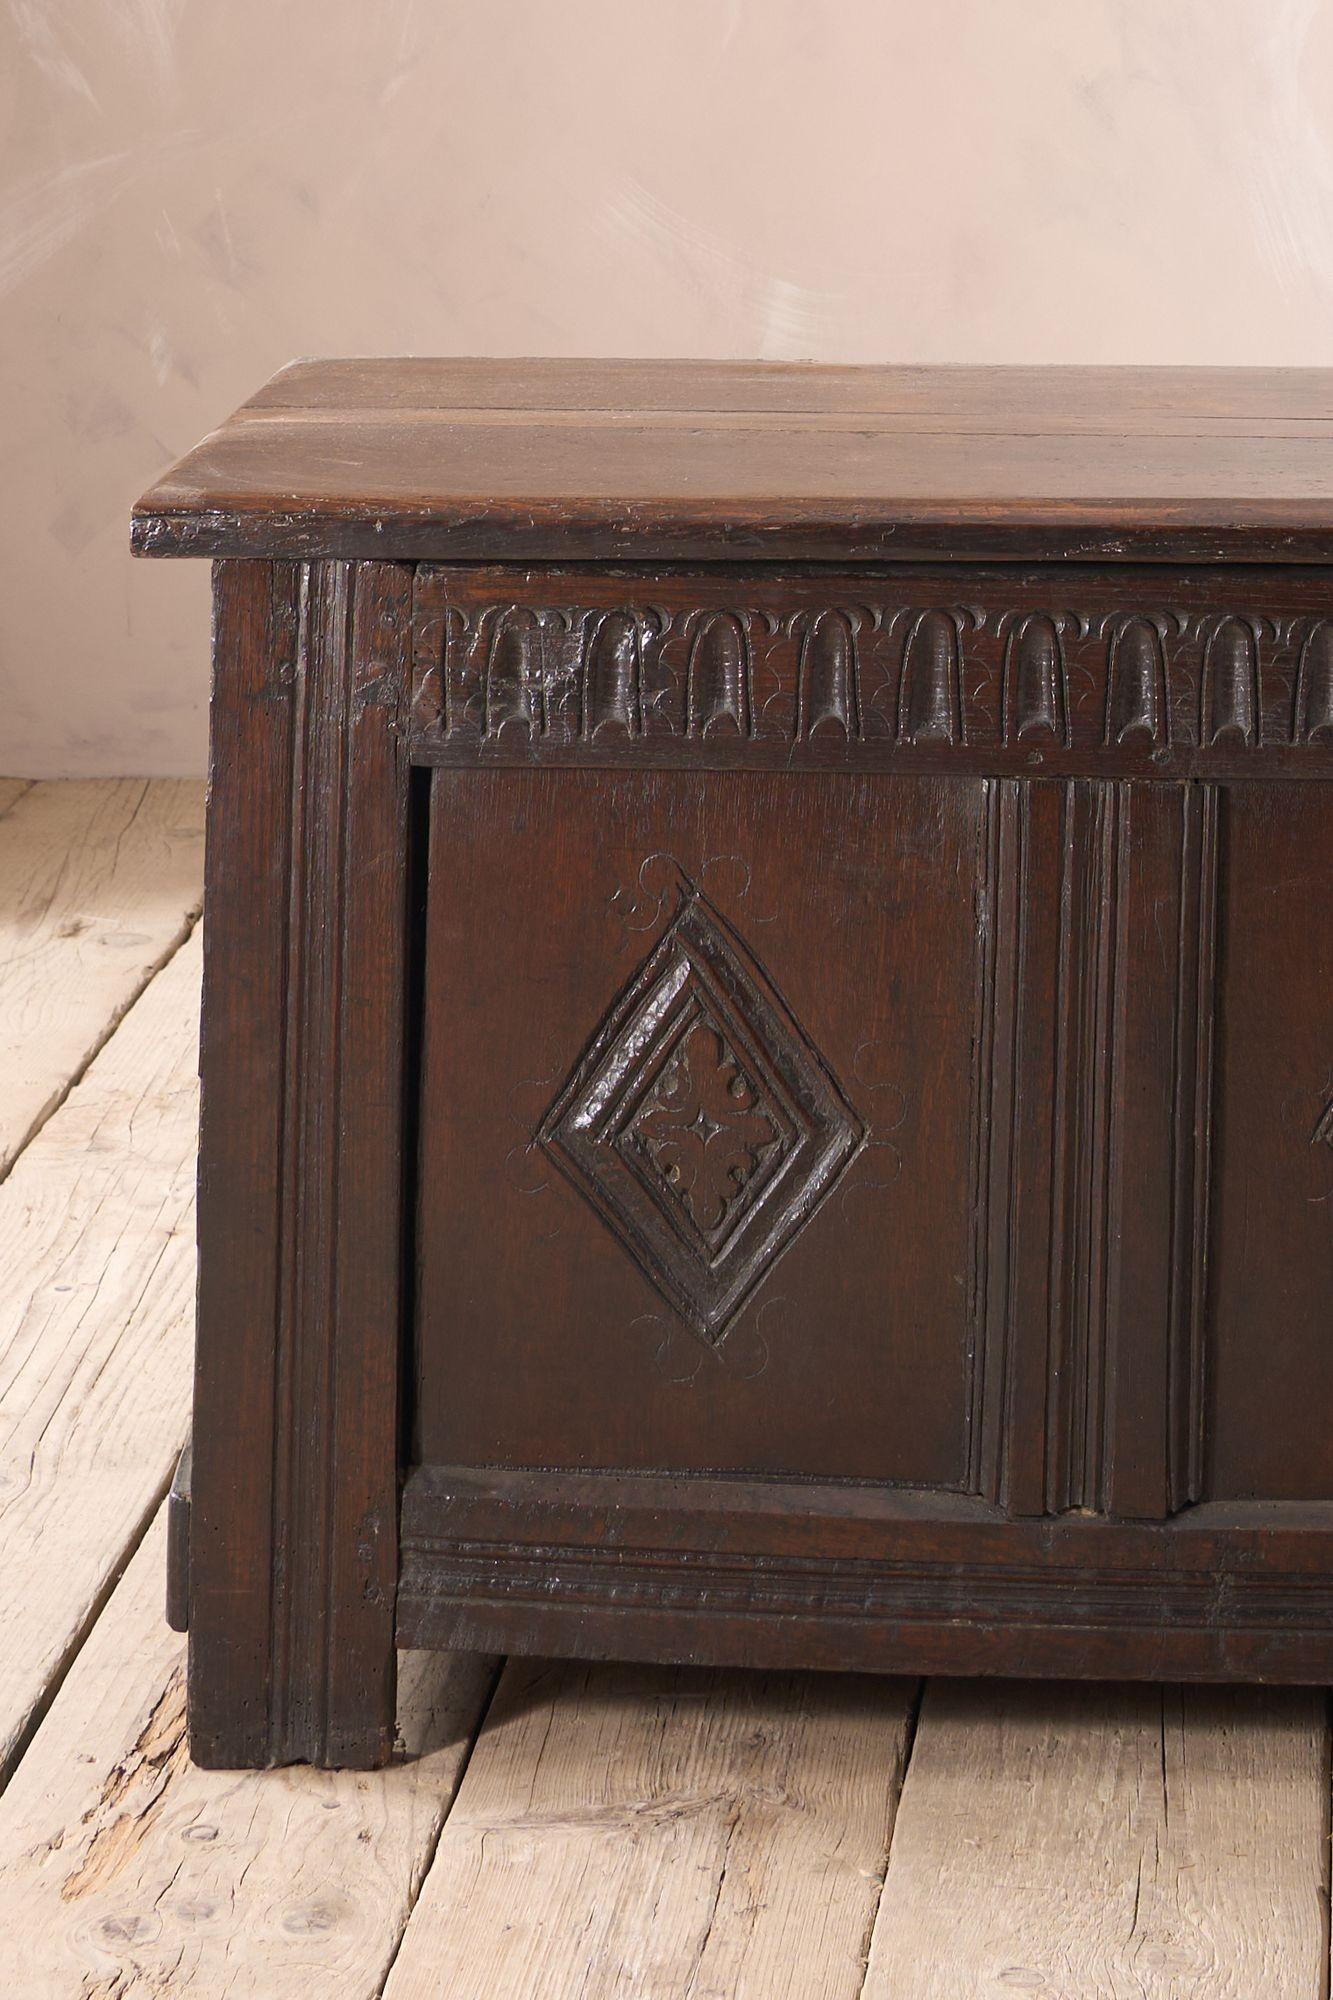 This is a very nice quality solid oak coffer from the Charles II period (1630-1685). It is in great overall condition with carved details to the front. The lis has strong iron hinges that are still in place. The interior is also painted and colour